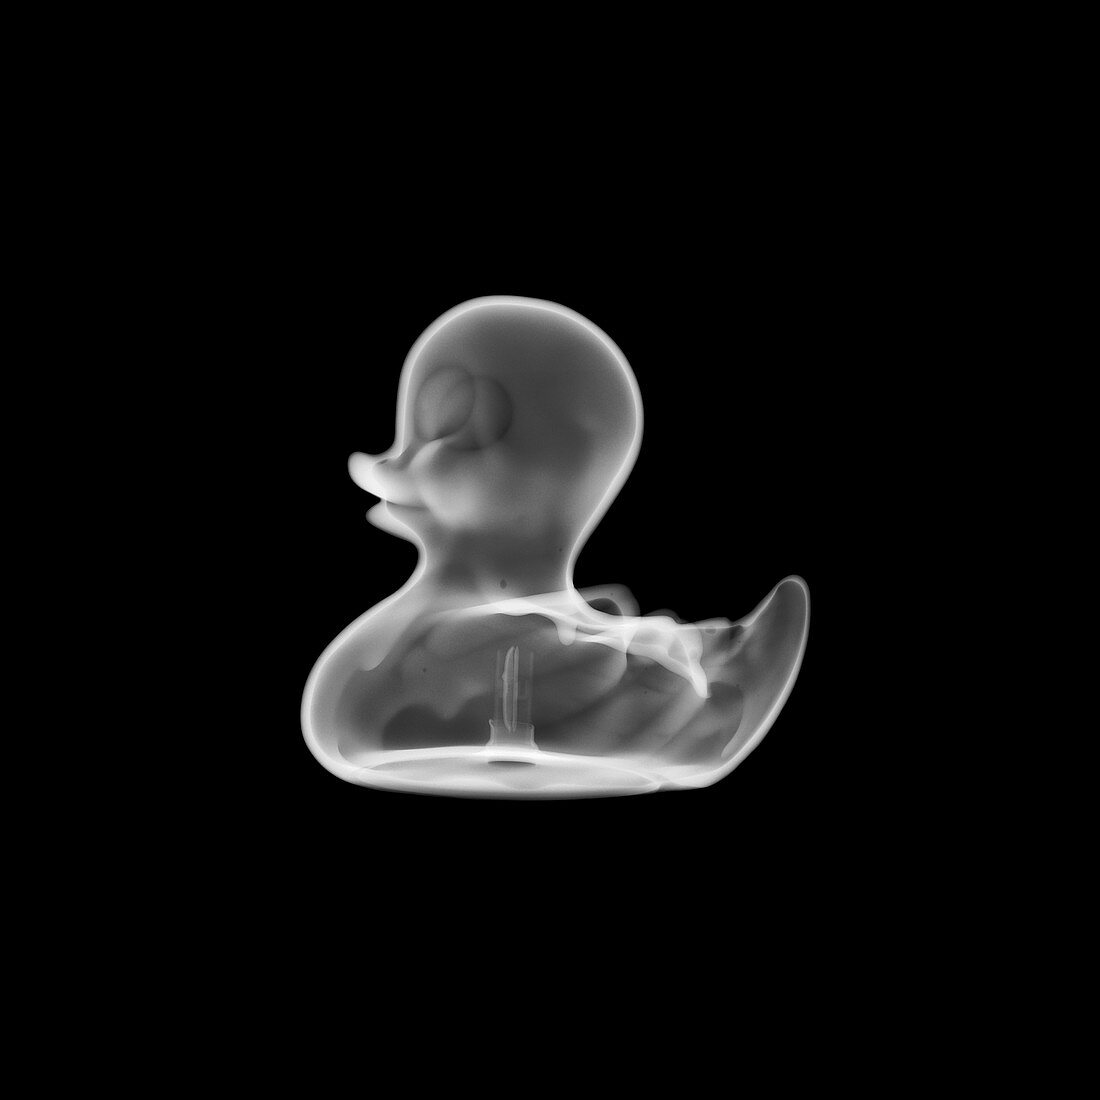 Rubber duck, X-ray